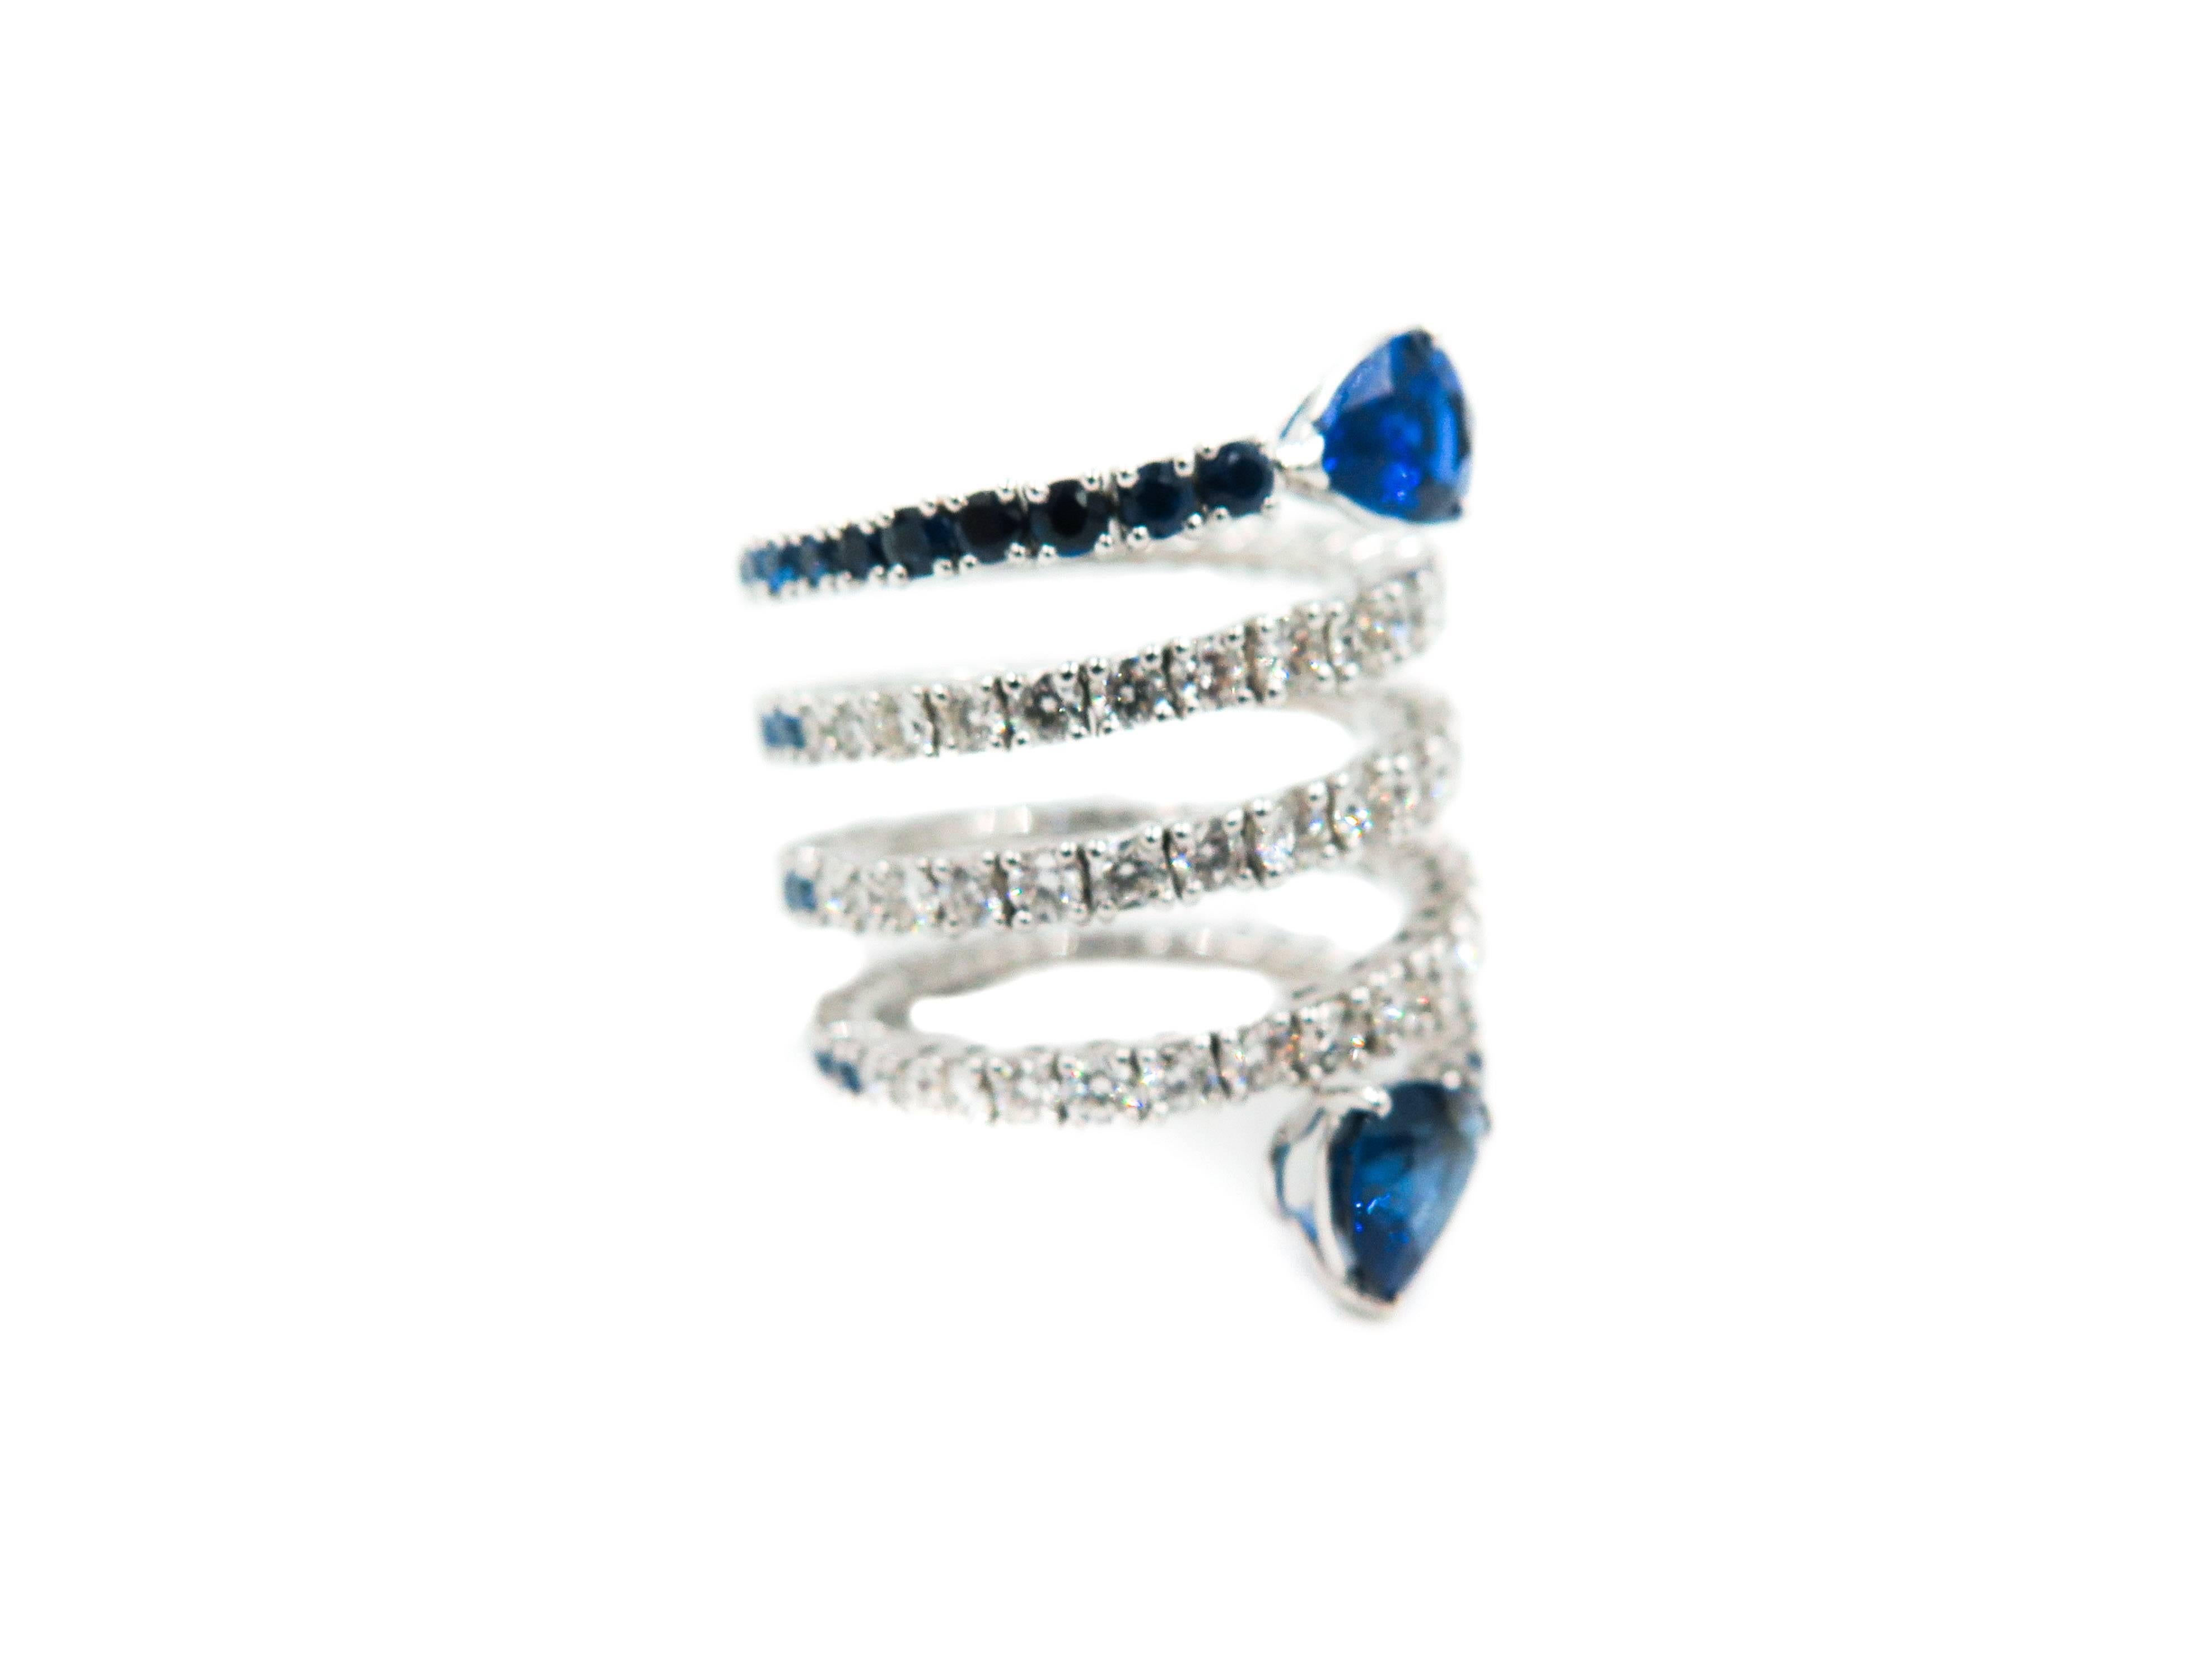 Each gemstone tells a different story and the combination develops into new tales . 
This bi-color spiral ring is different from any other, it is created with the most beautiful color combination: sapphires and diamonds.
Half of the spiral is a line